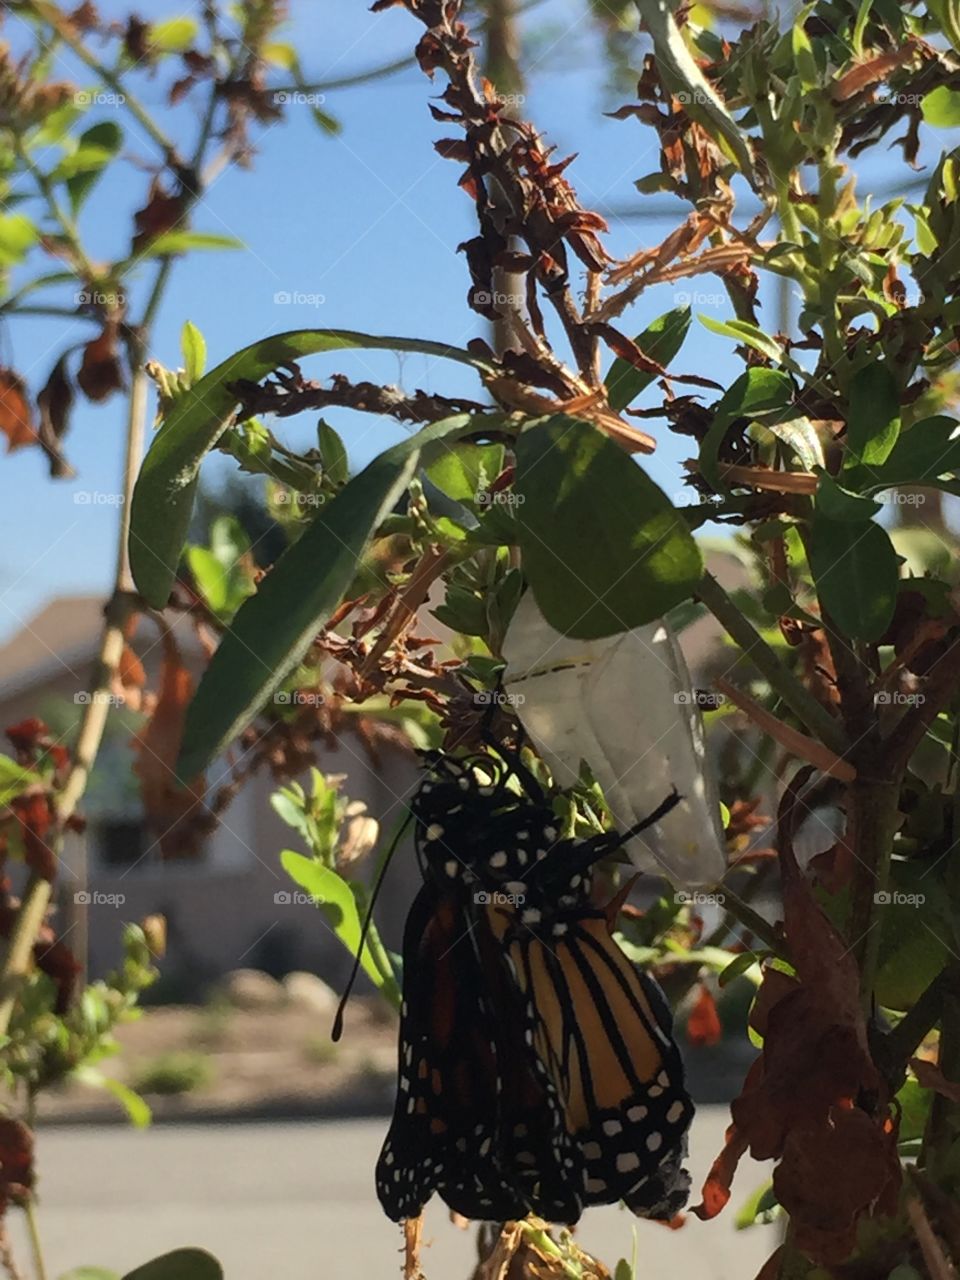 Brand new monarch butterfly 